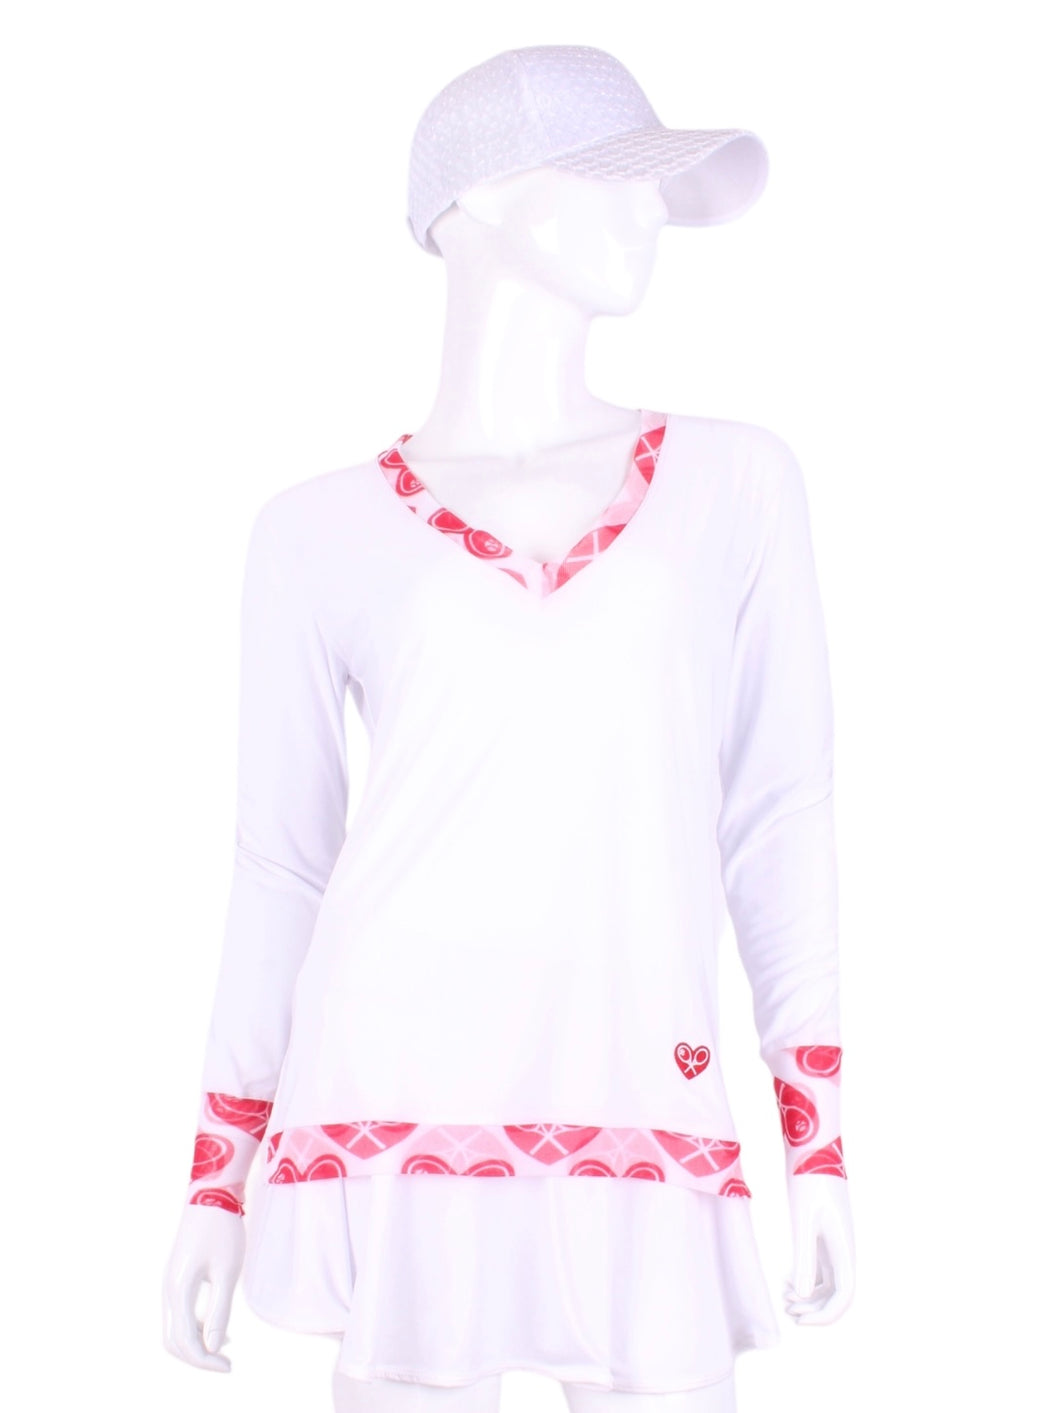 White Long Sleeve Very Vee Tee with Heart Trim. This top is soooo gorgeous!  The collar and cuffs are accented with feminine mesh and the body is flowy and soft.  It’s called the Long Sleeve Very Vee Tee - because as you can see - the Vee is - well you know - VERY VEE!  For the tennis lady who loves to leave her chest open - but cover her arms (and other bits) this top is seductive in a sweet way!